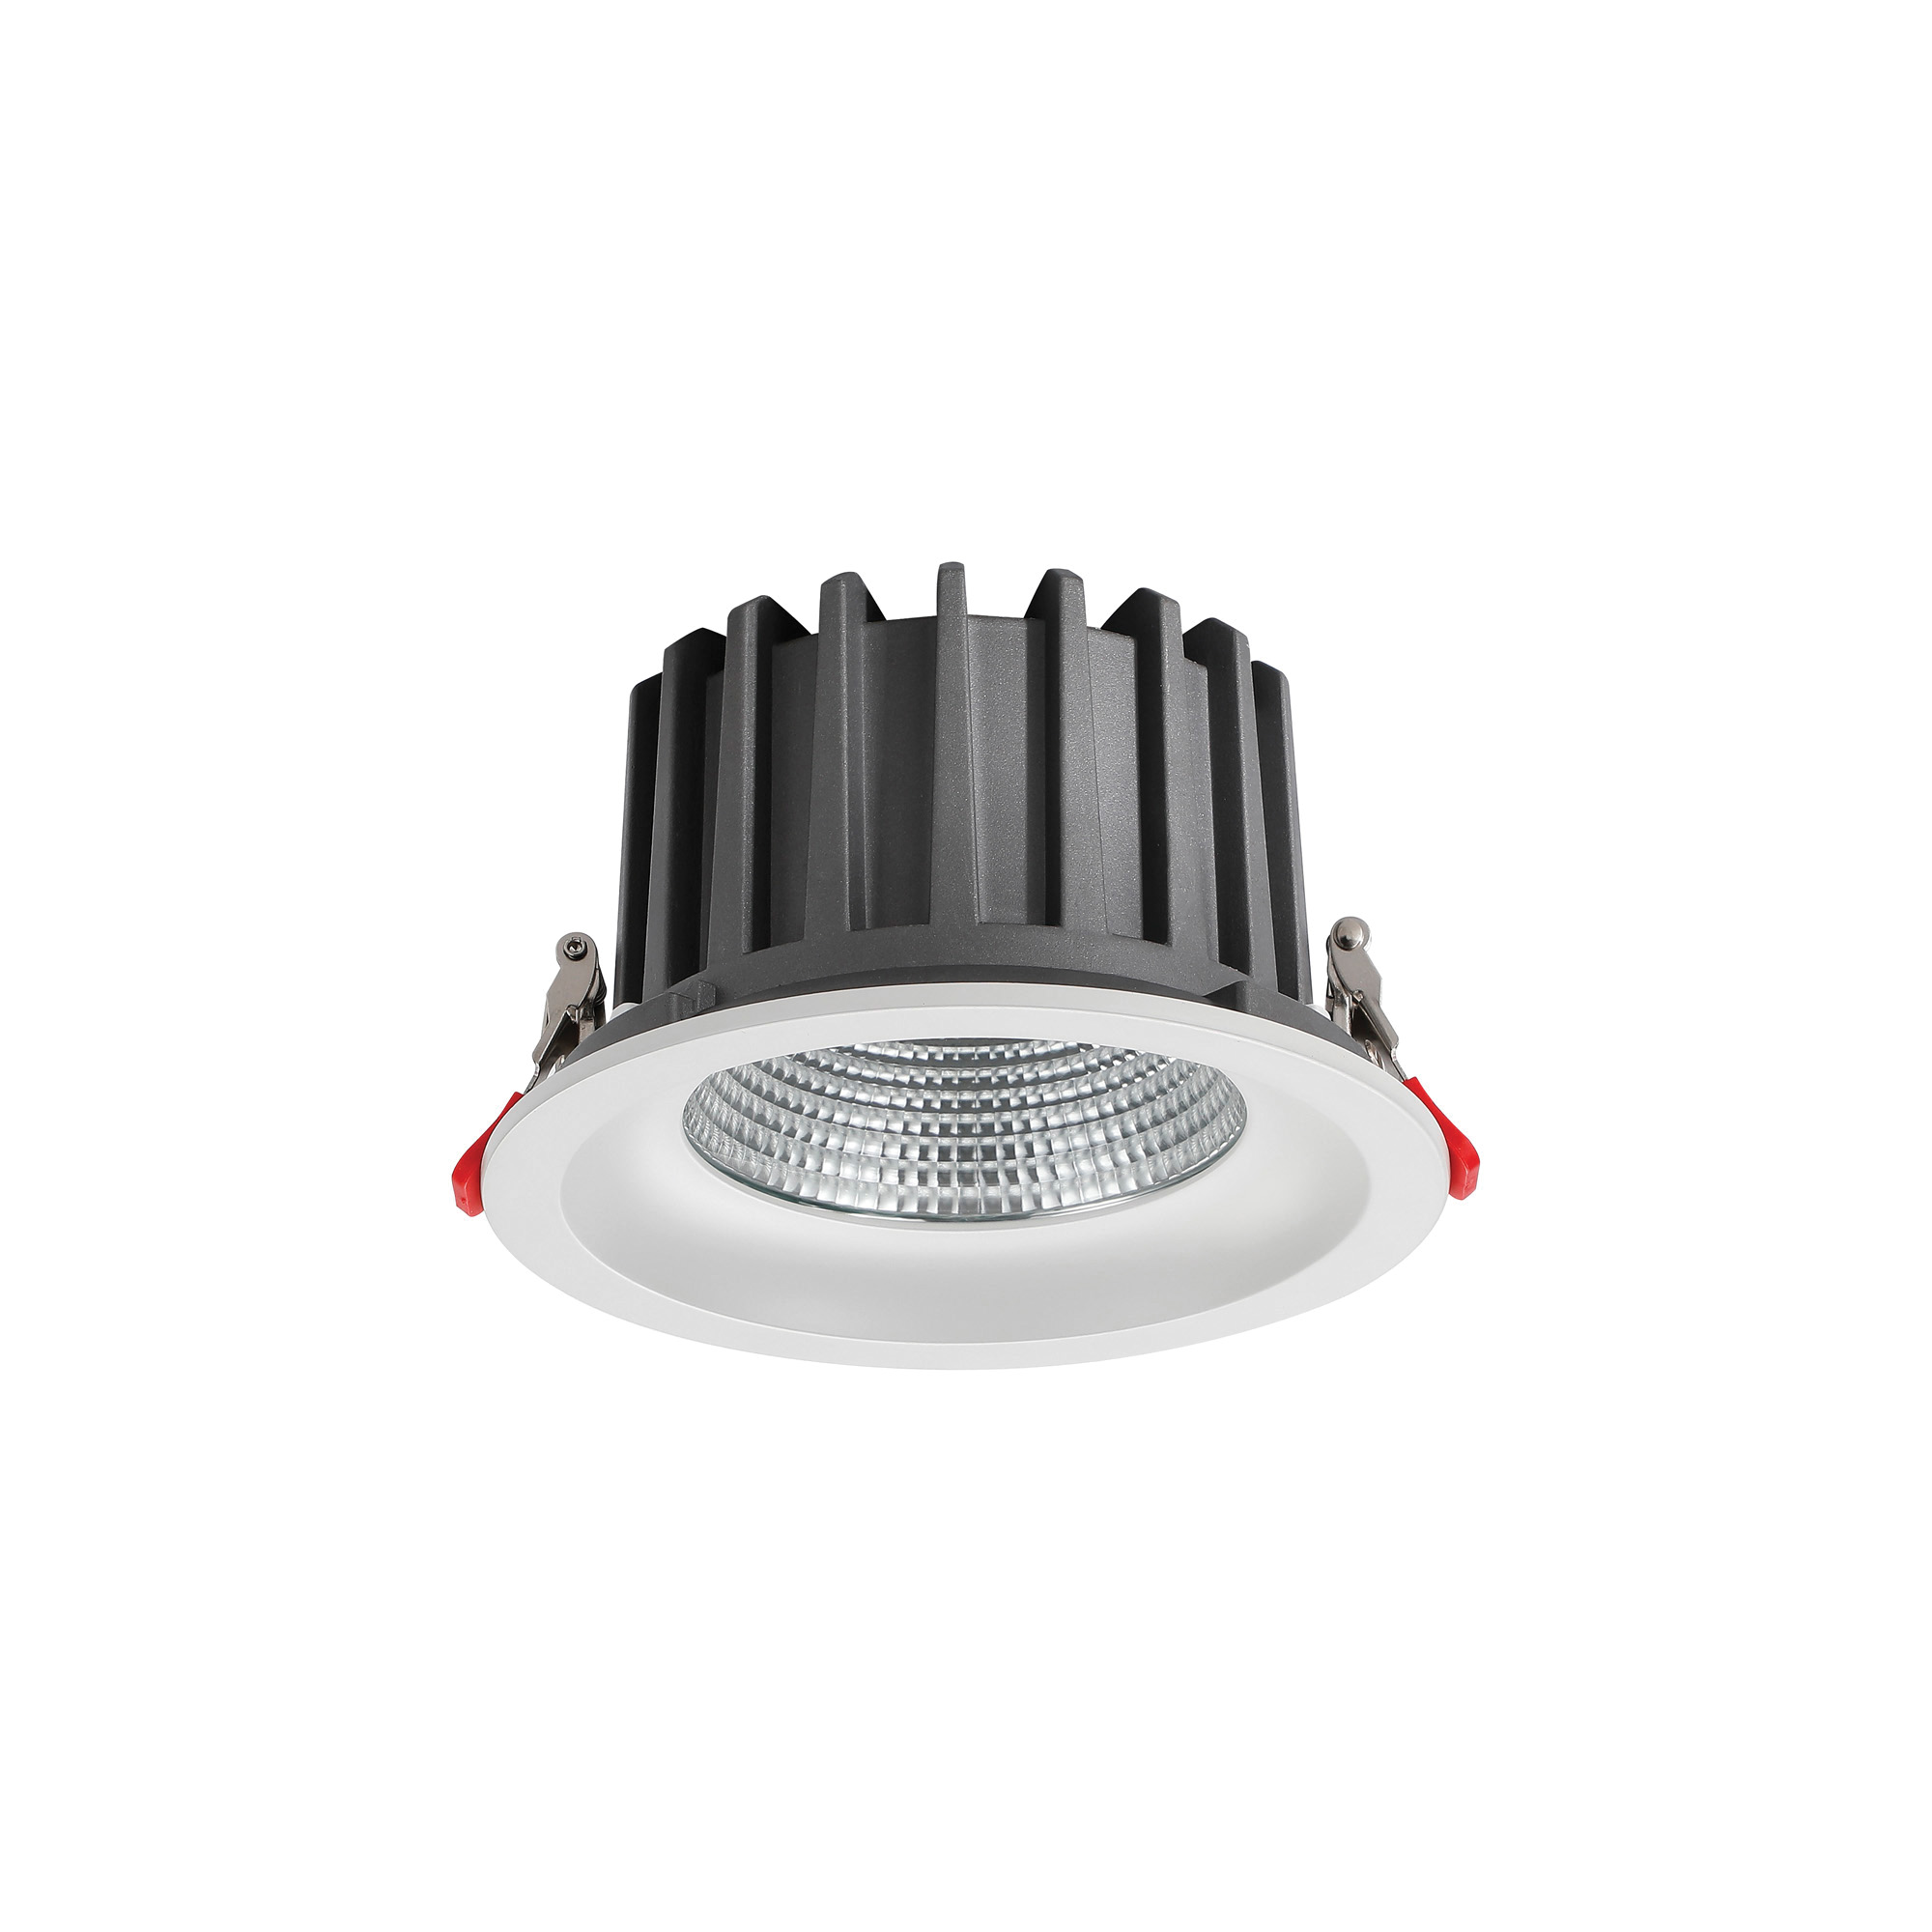 DL200061  Bionic 30, 30W, 700mA, White Deep Round Recessed Downlight, 2400lm ,Cut Out 155mm, 42° , 3000K, IP44, DRIVER INC., 5yrs Warranty.